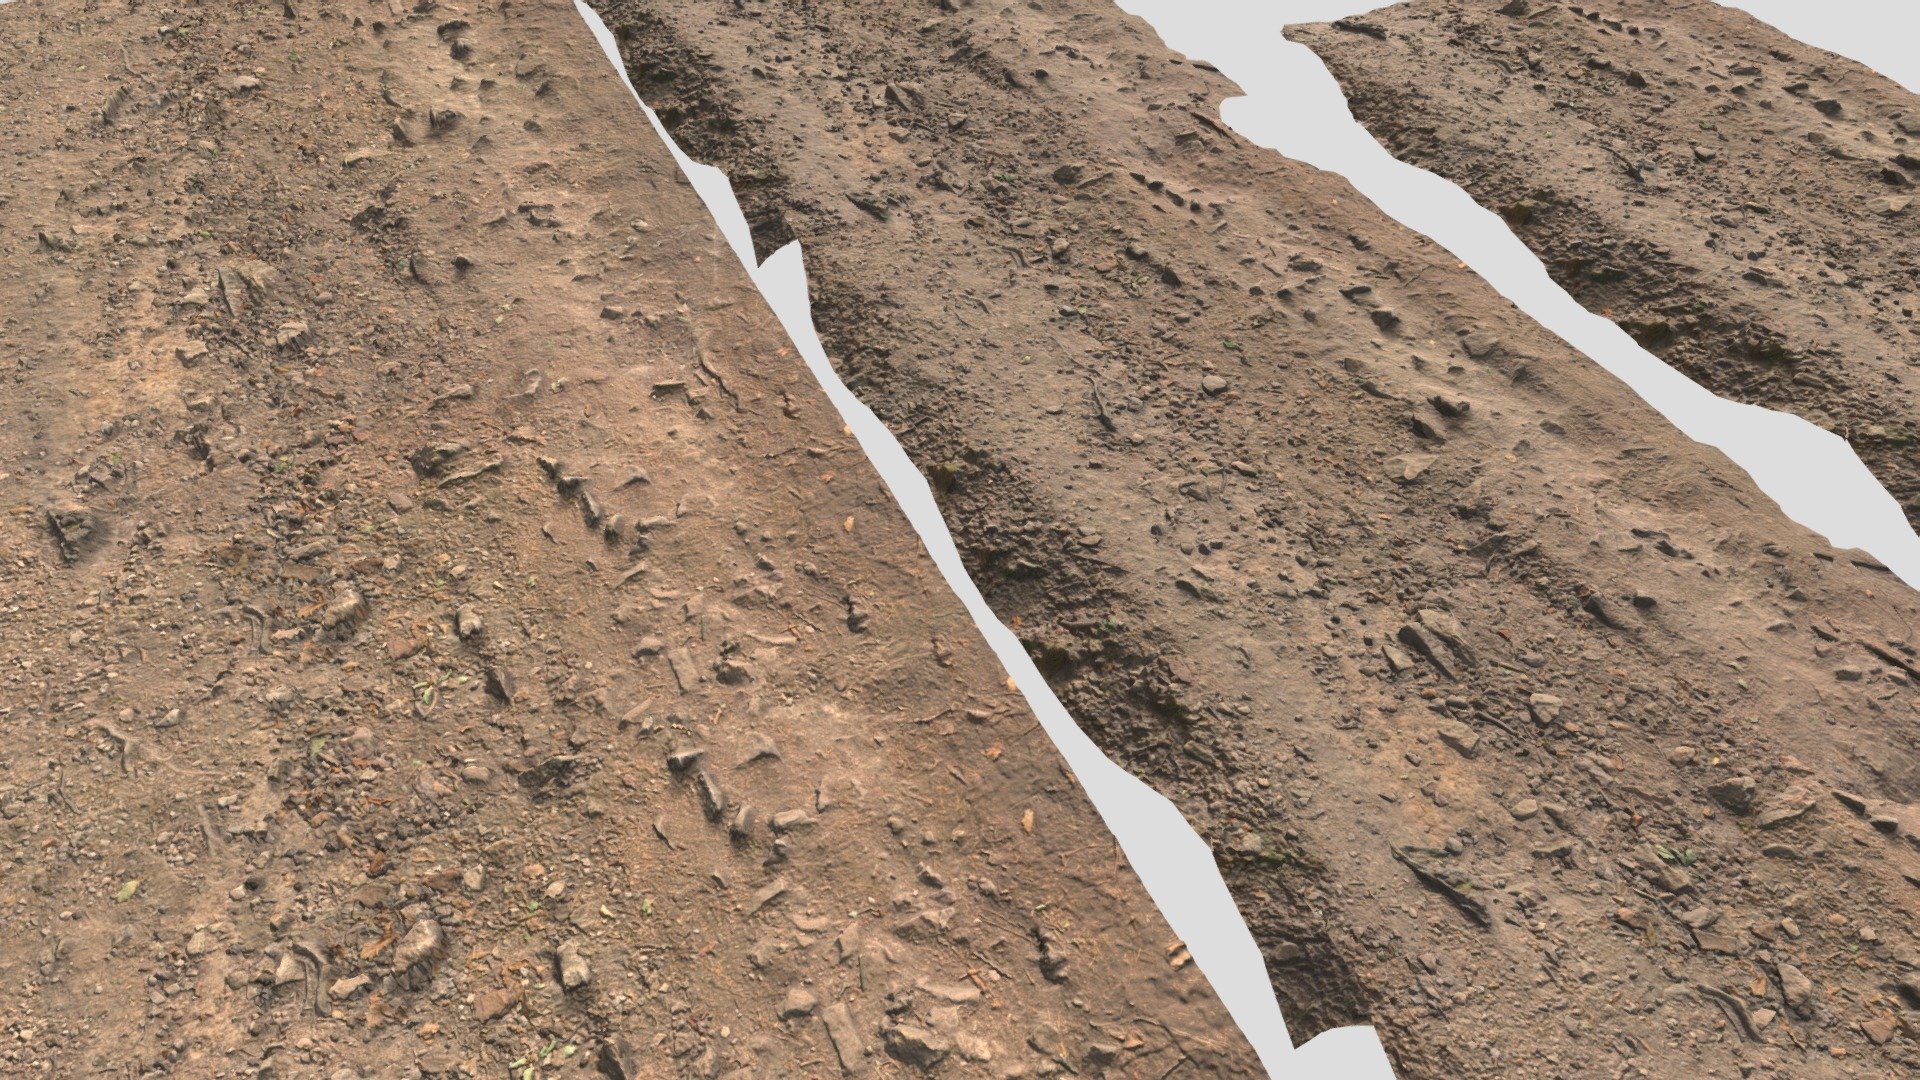 Fully processed 3D scans: reduced light information, color-matched, etc.

One baked module with 8K Textures:





normal




albedo 




roughness



Tileable road texture with a displacement example:
8192x4096:

-normal 





albedo 




roughness




displacement



Please let me know if something isn’t working as it should.

Realistic Forest Road Rocks Scan Tileable - Forest Road Rocks Scan Tileable - Buy Royalty Free 3D model by Per's Scan Collection (@perz_scans) 3d model